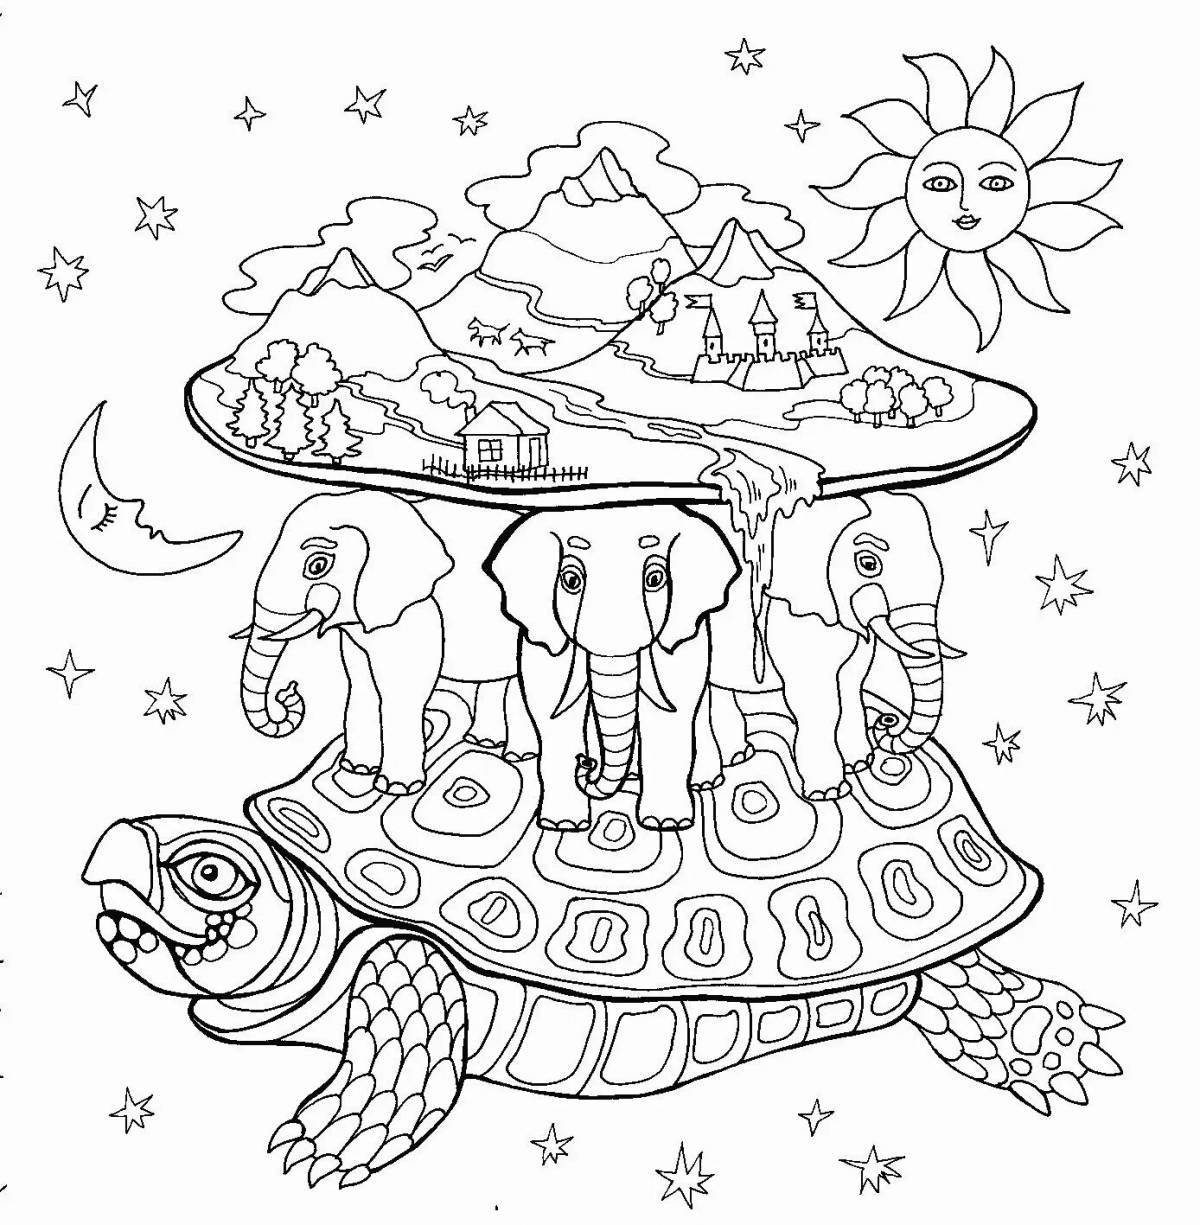 Colorful universe coloring page